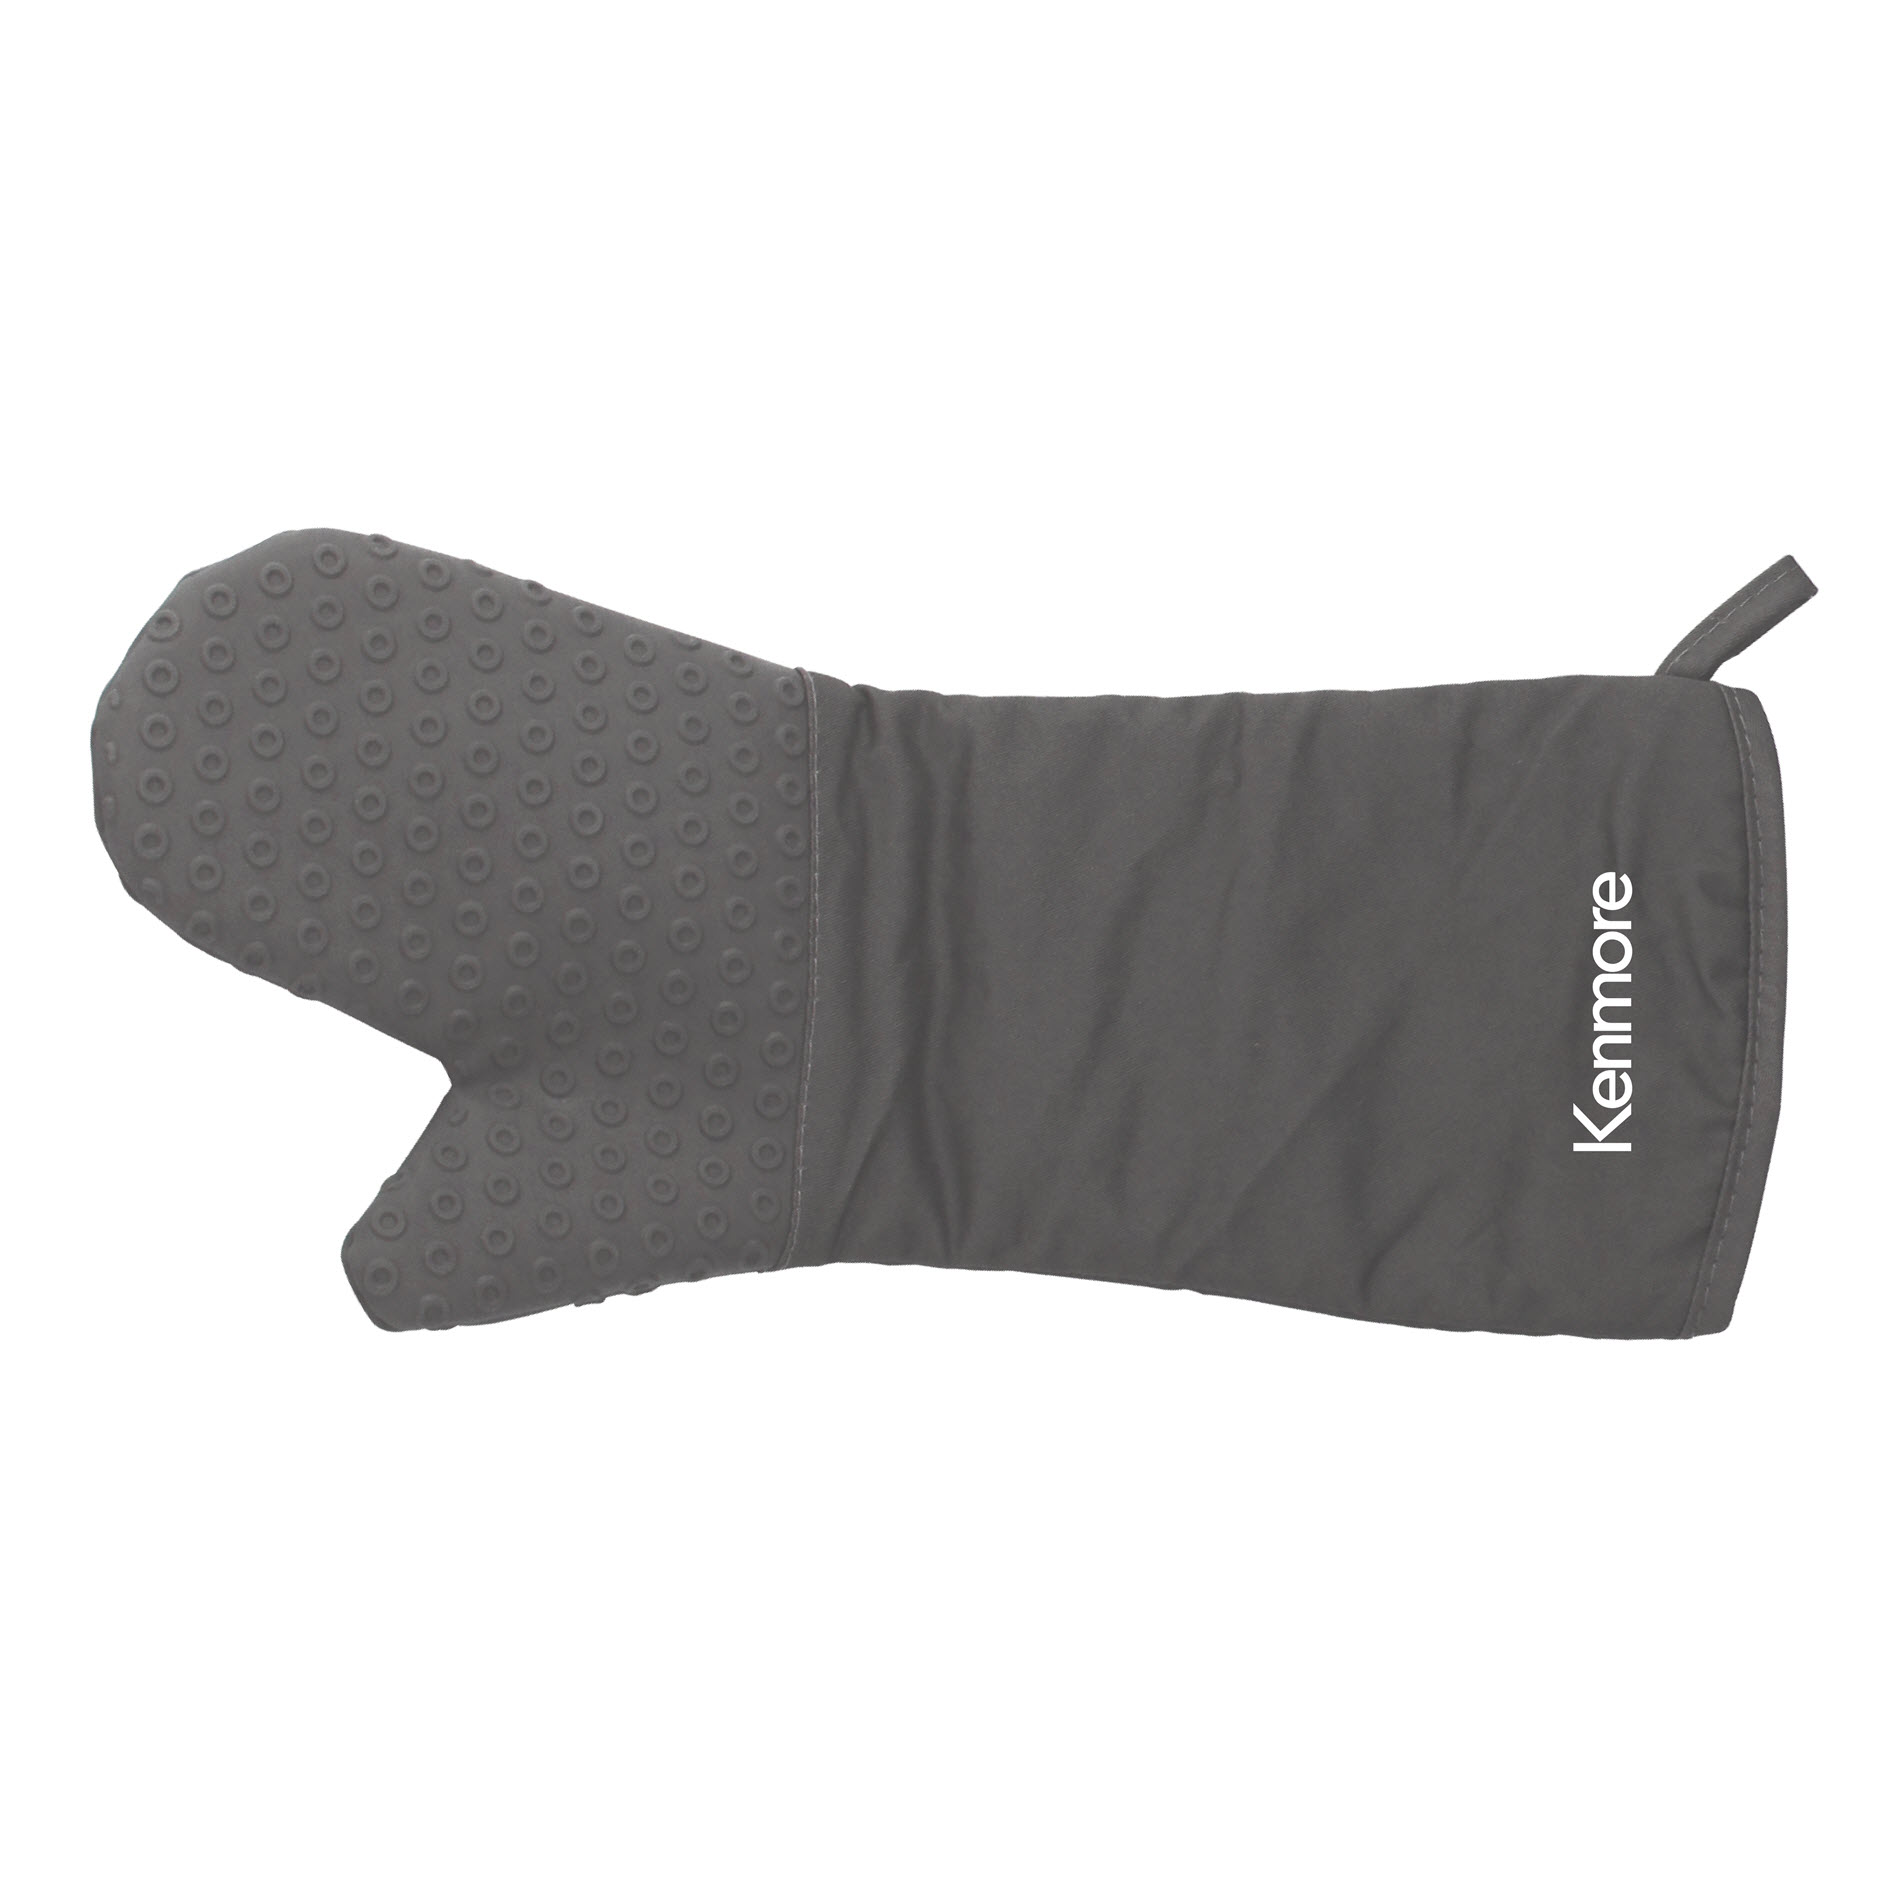 Kenmore Cool Cooking Glove